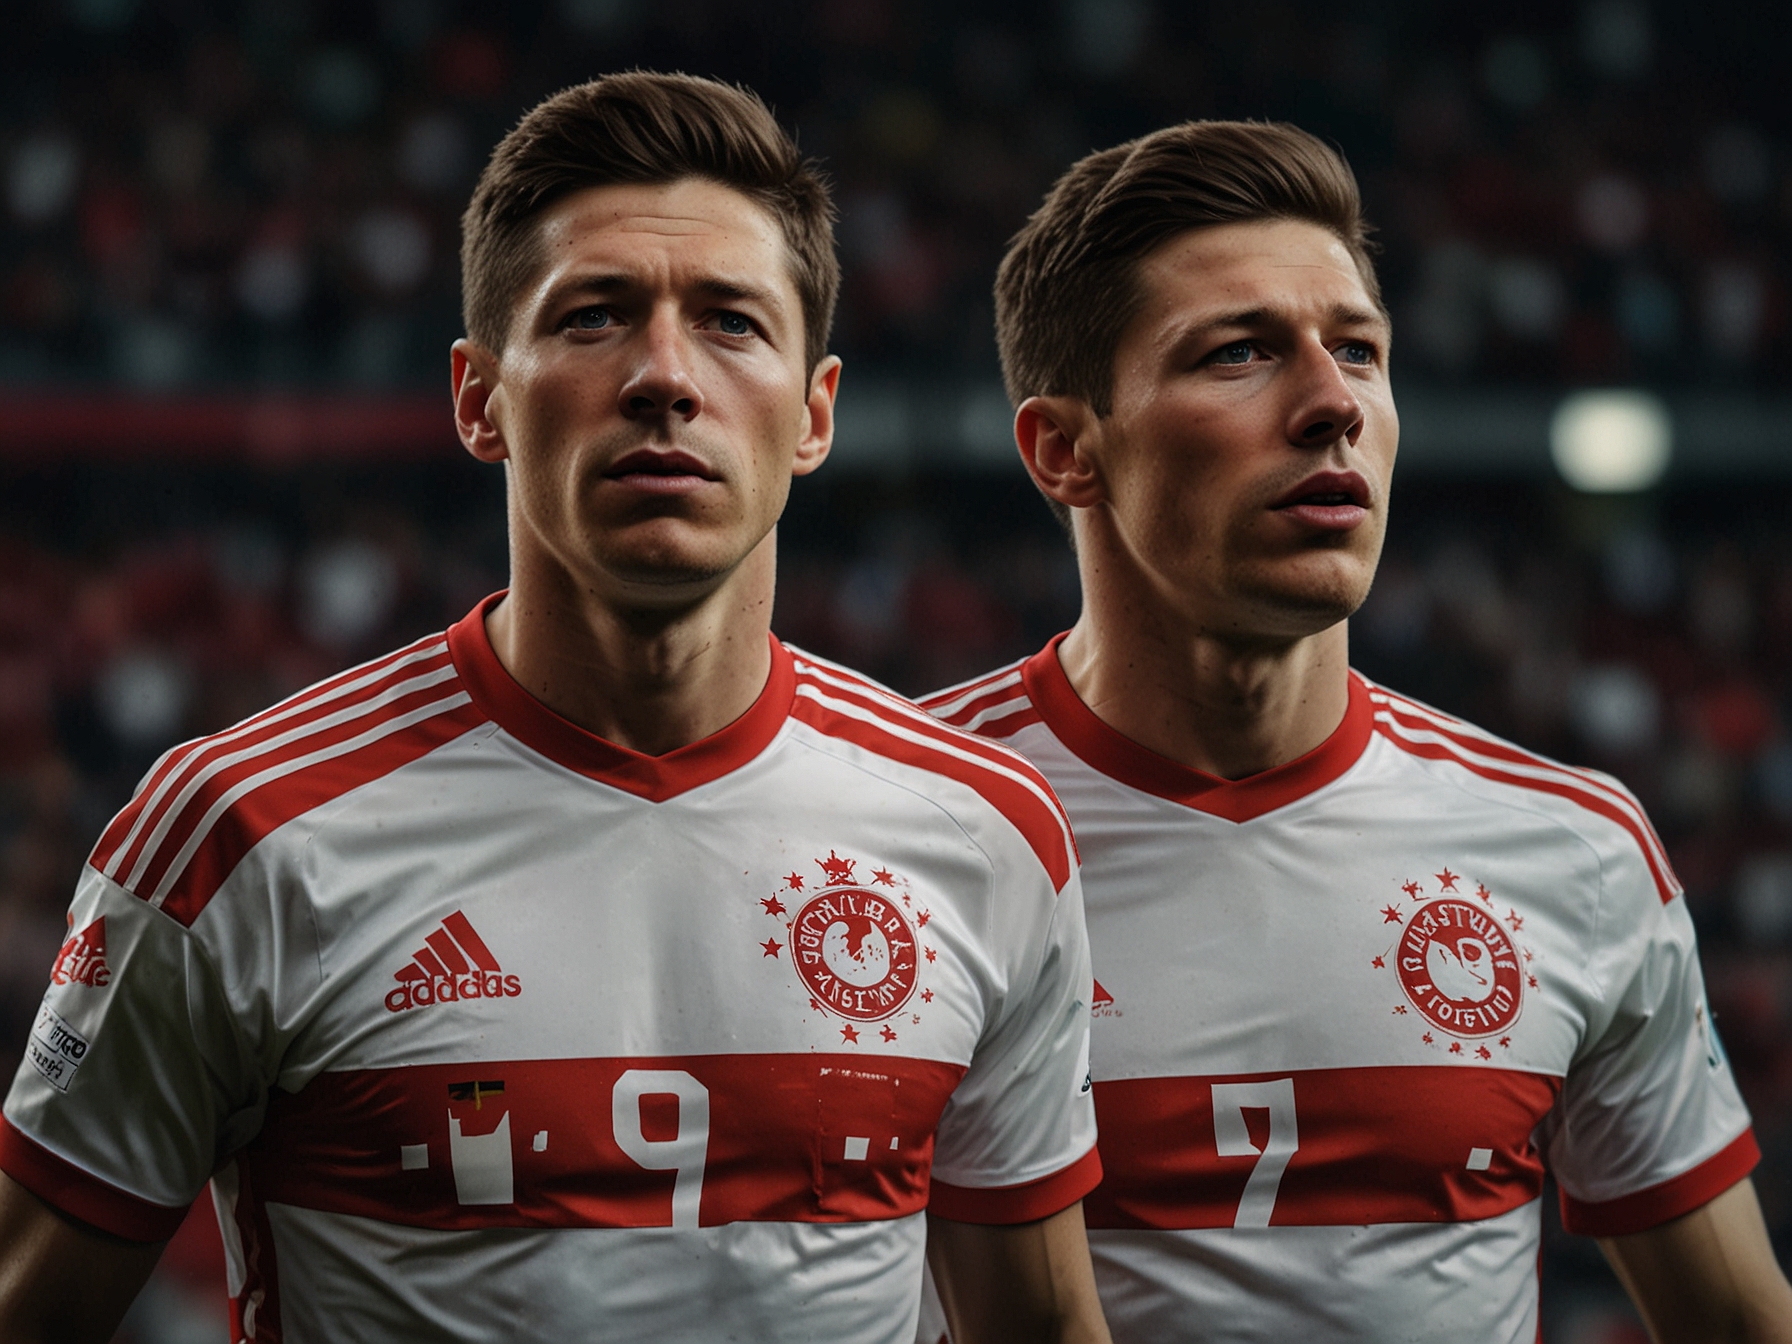 A close-up of star players Robert Lewandowski of Poland and David Alaba of Austria, epitomizing their critical roles and contributions to their respective teams in past encounters.